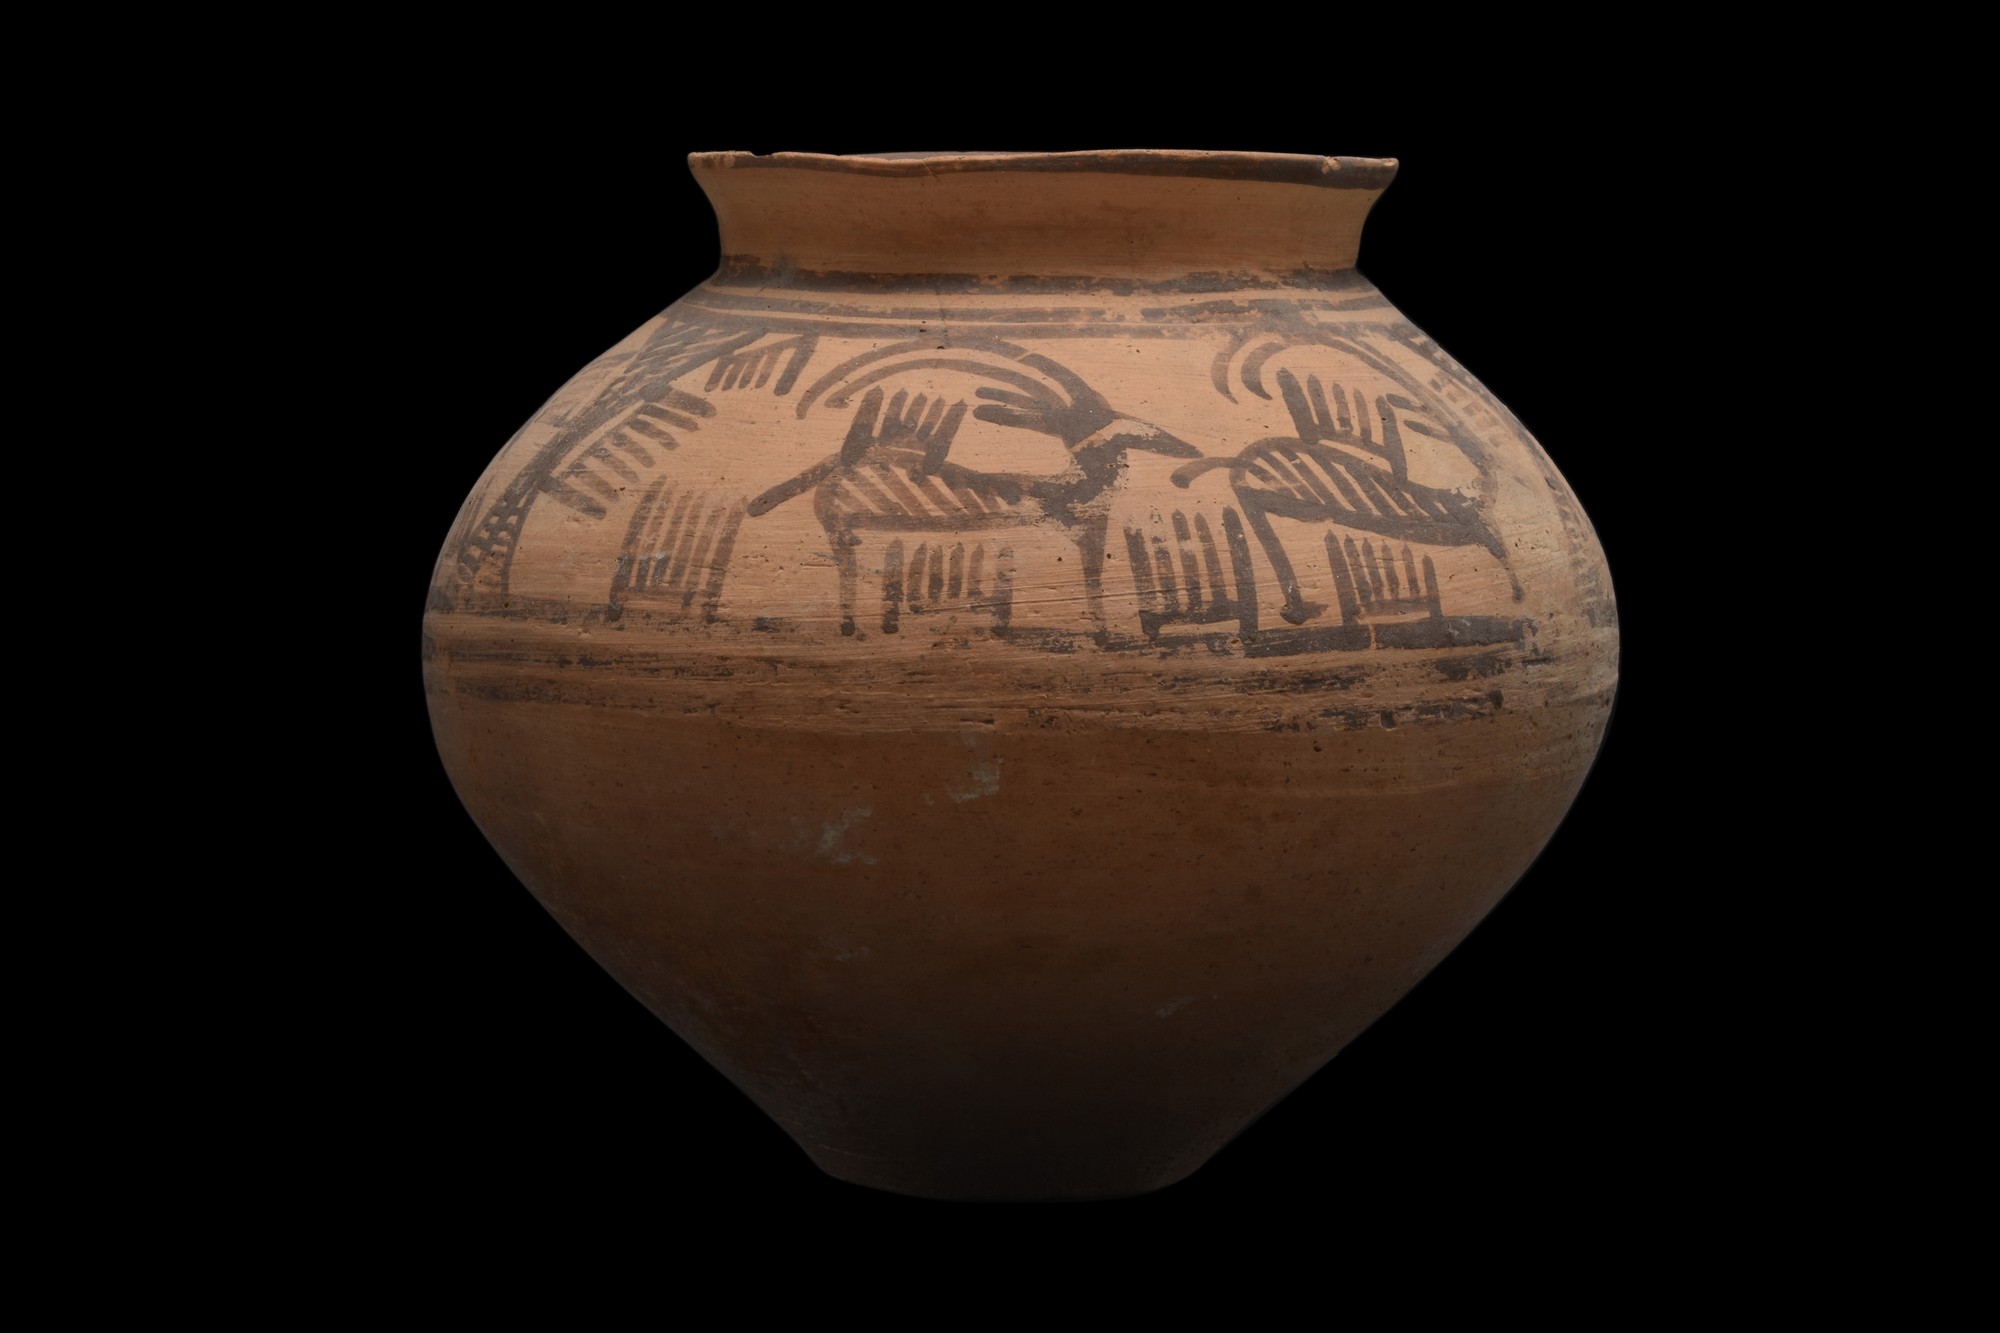 INDUS VALLEY TERRACOTTA VESSEL WITH IBEXES